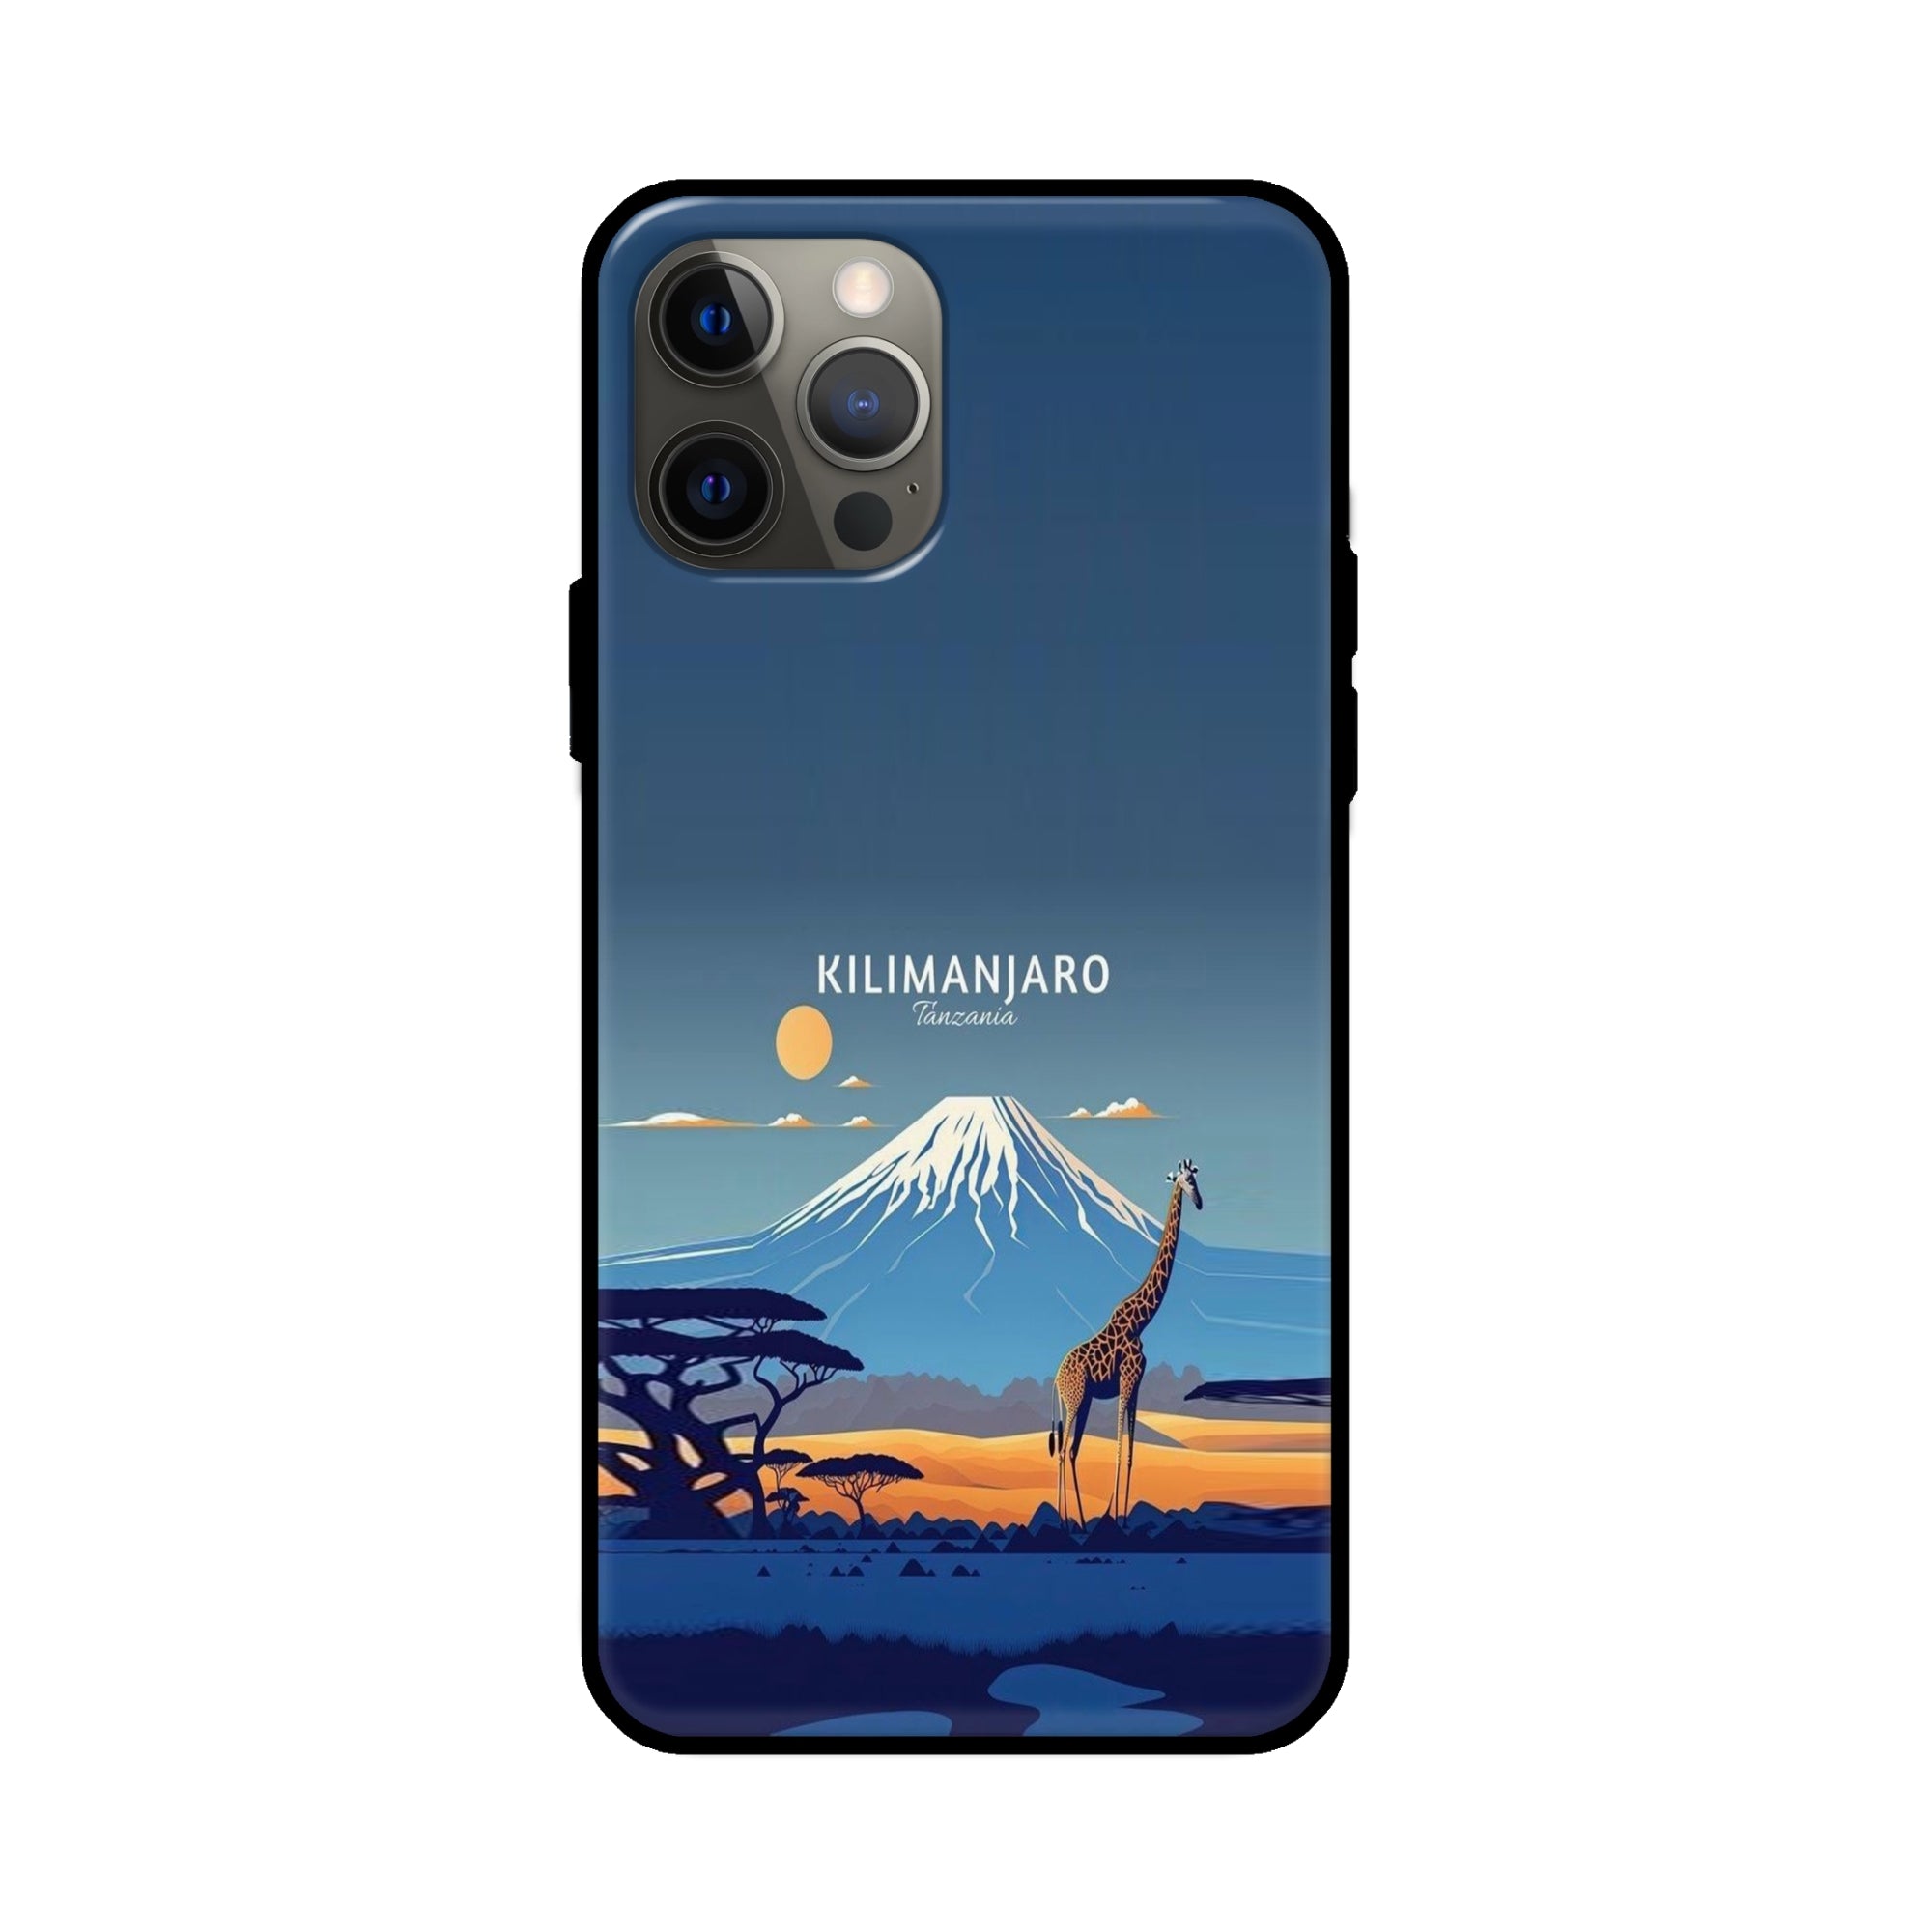 Buy Kilimanjaro Glass/Metal Back Mobile Phone Case/Cover For Apple iPhone 12 pro max Online